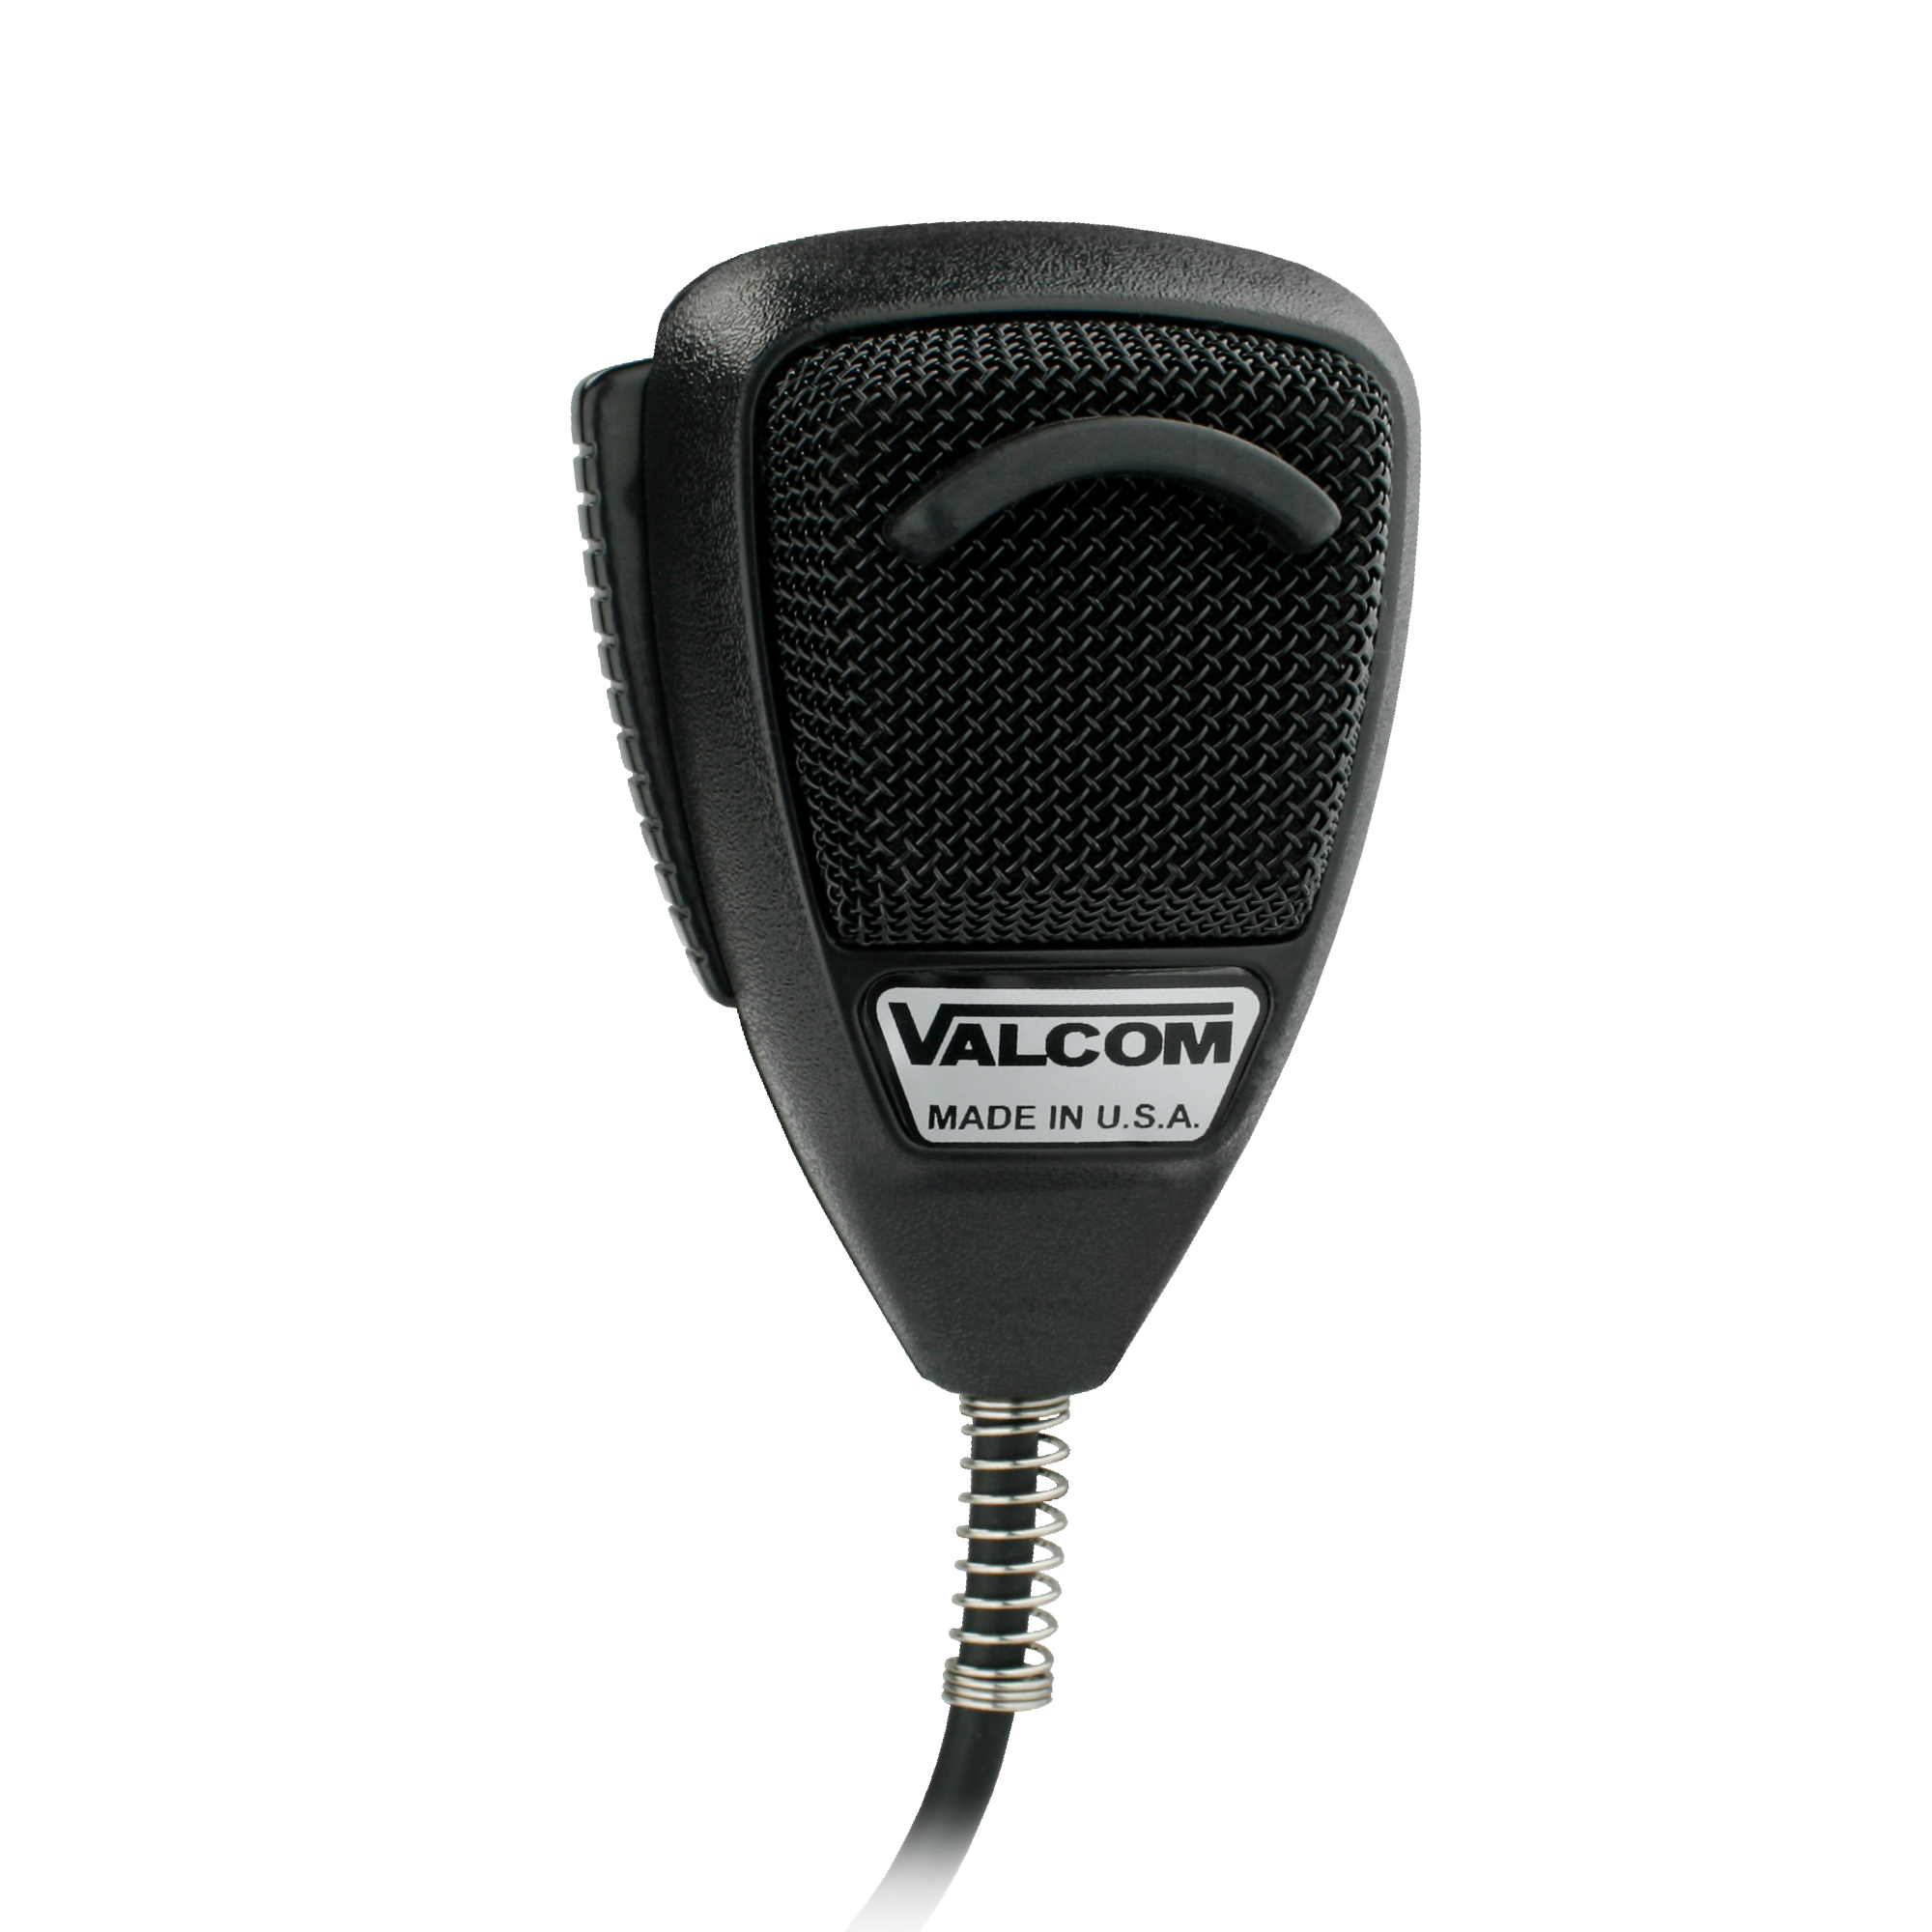 V-420 Dynamic Hand Held Noise Canceling Microphone